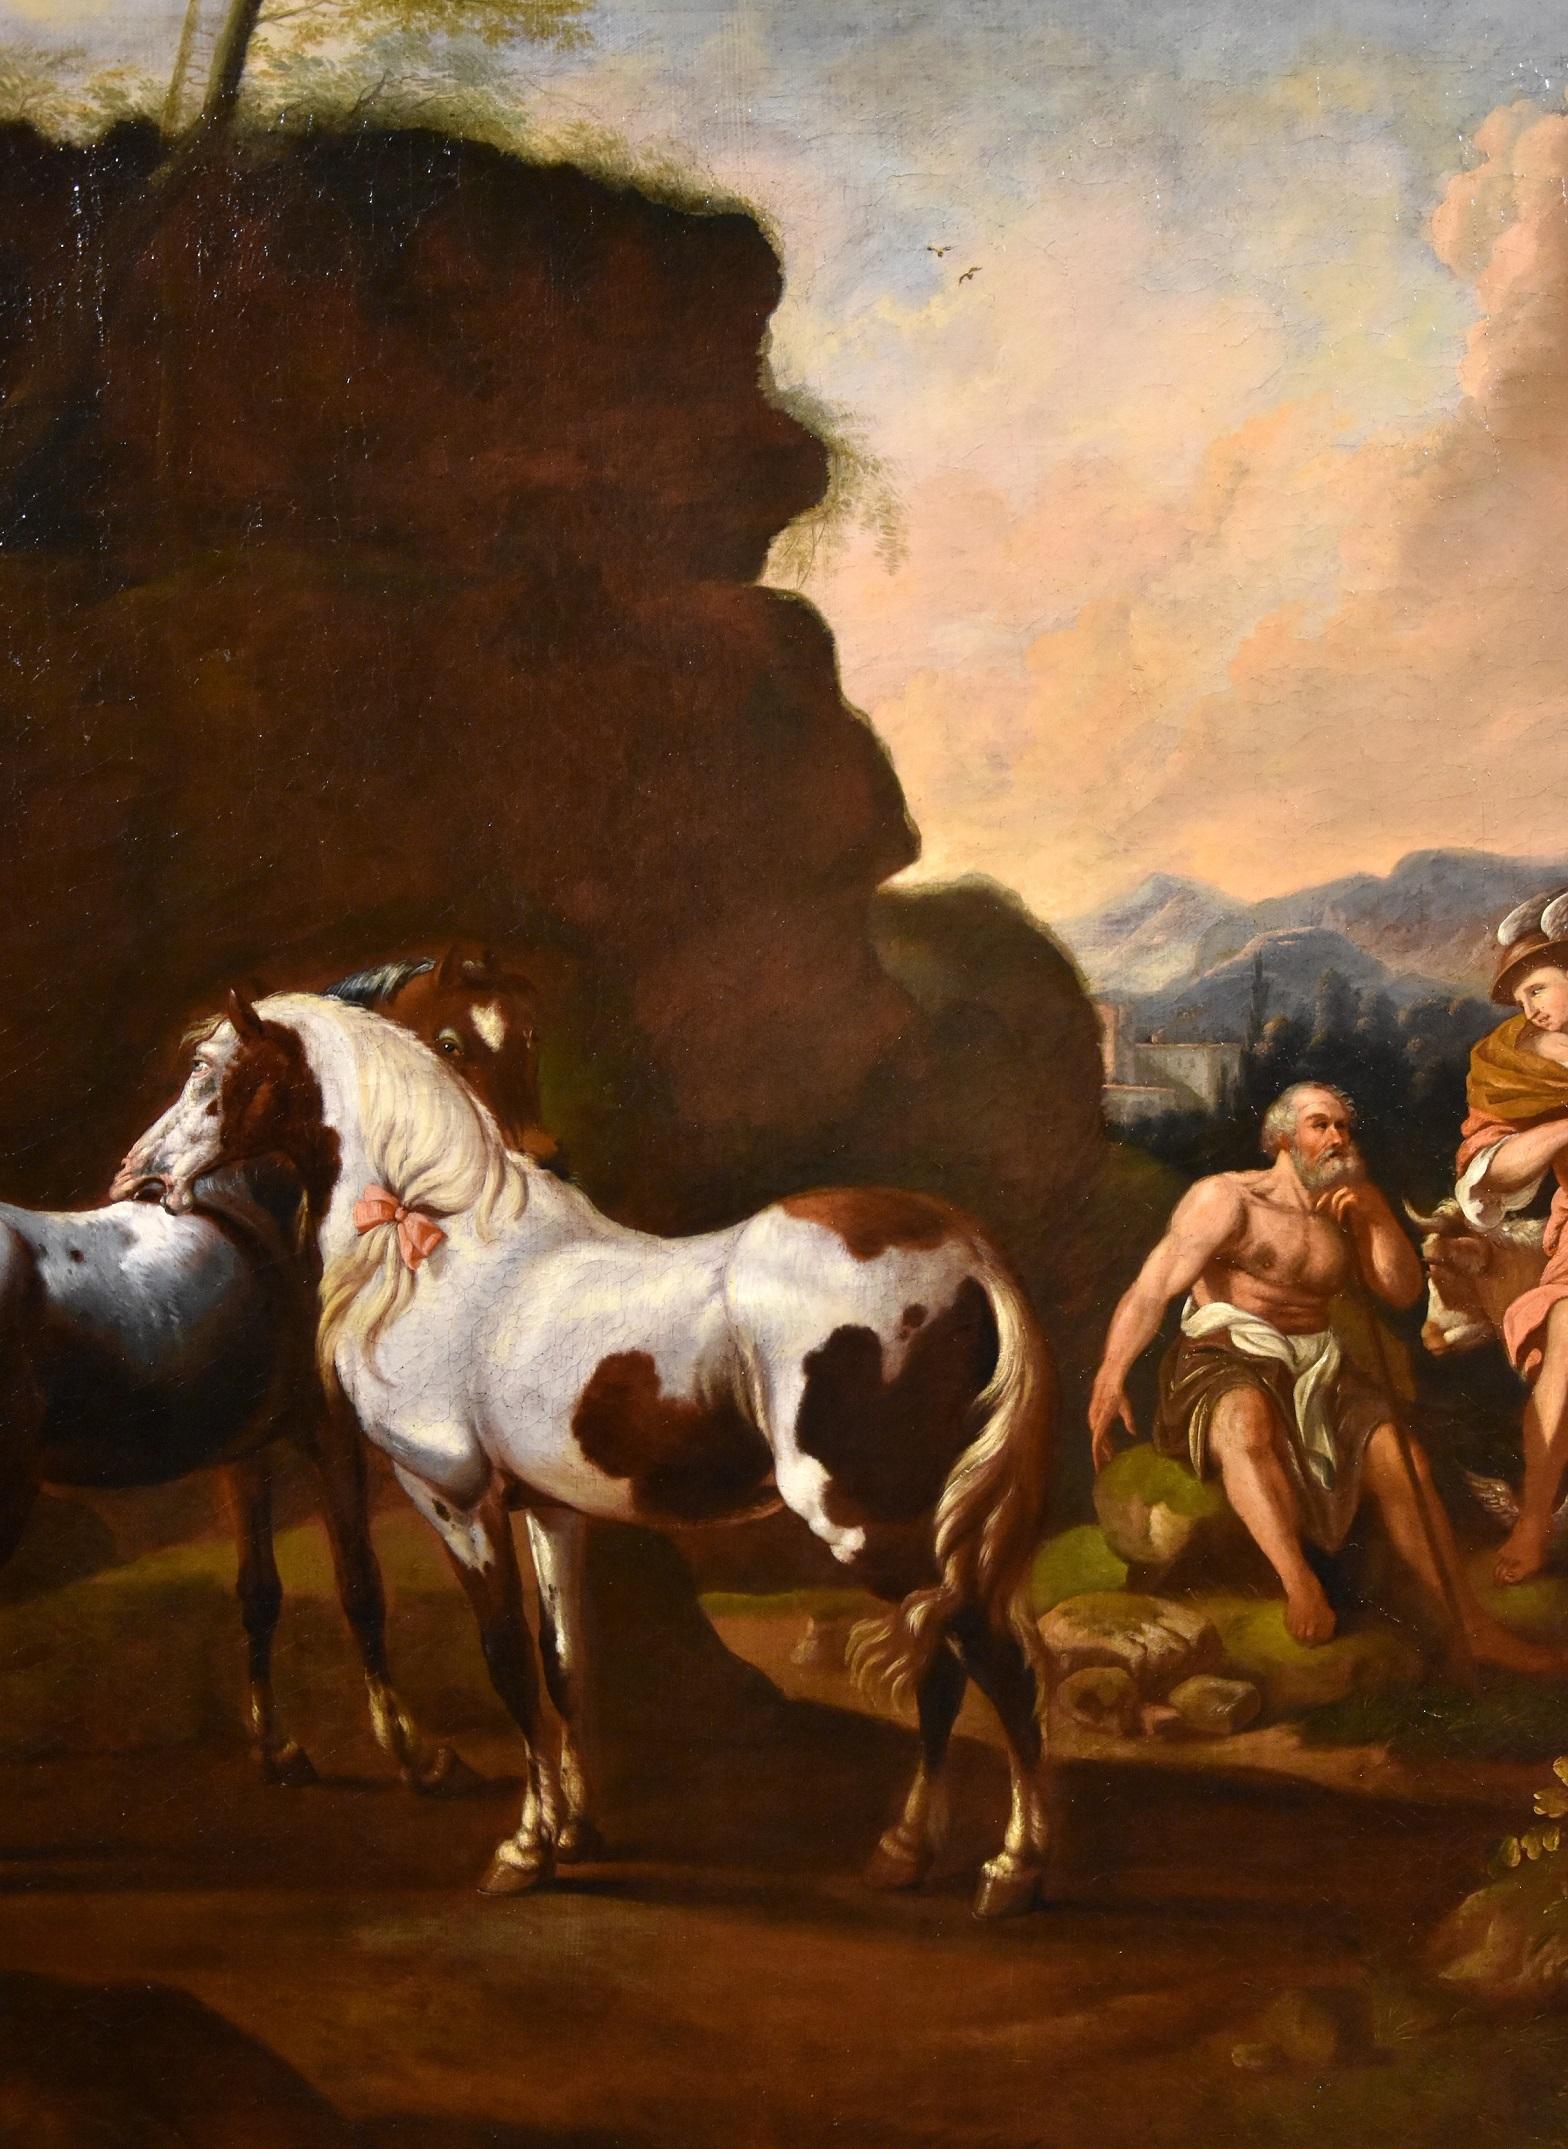 Roos Landscape Myth Mercury Horse Paint Oil on canvas Old master 17th Century - Old Masters Painting by Johann Heinrich Roos (Otterberg 1631 - Frankfurt 1685)